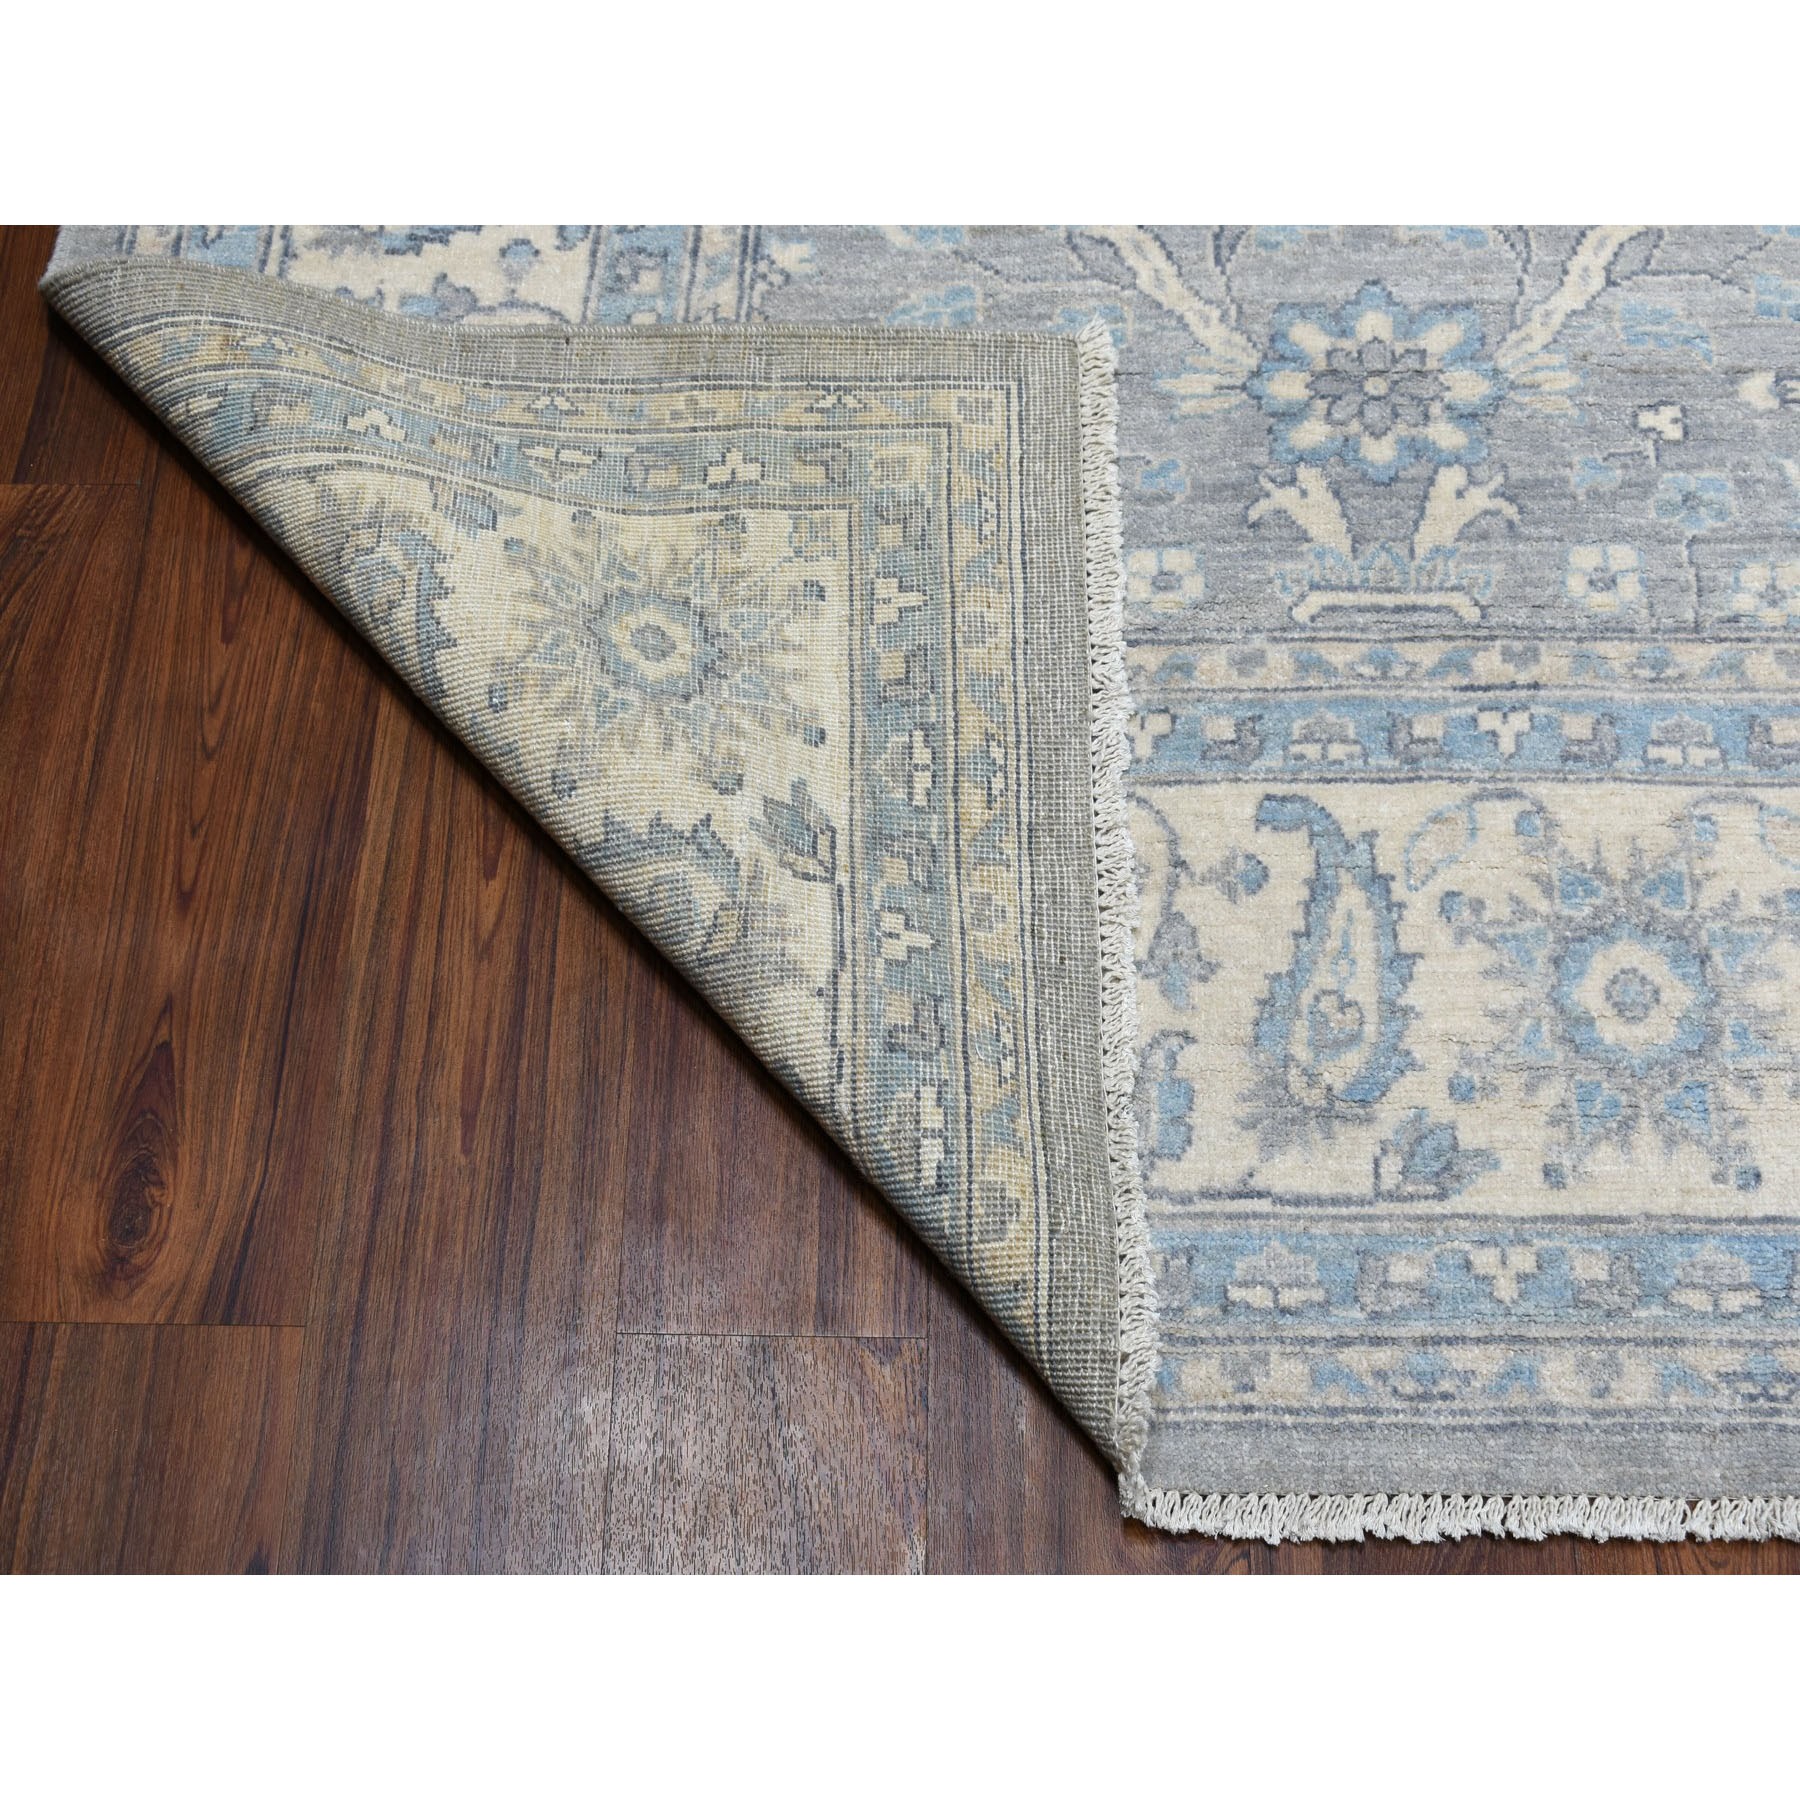 7-10 x10- White Wash Peshawar Pure Wool Hand Knotted Oriental Rug 